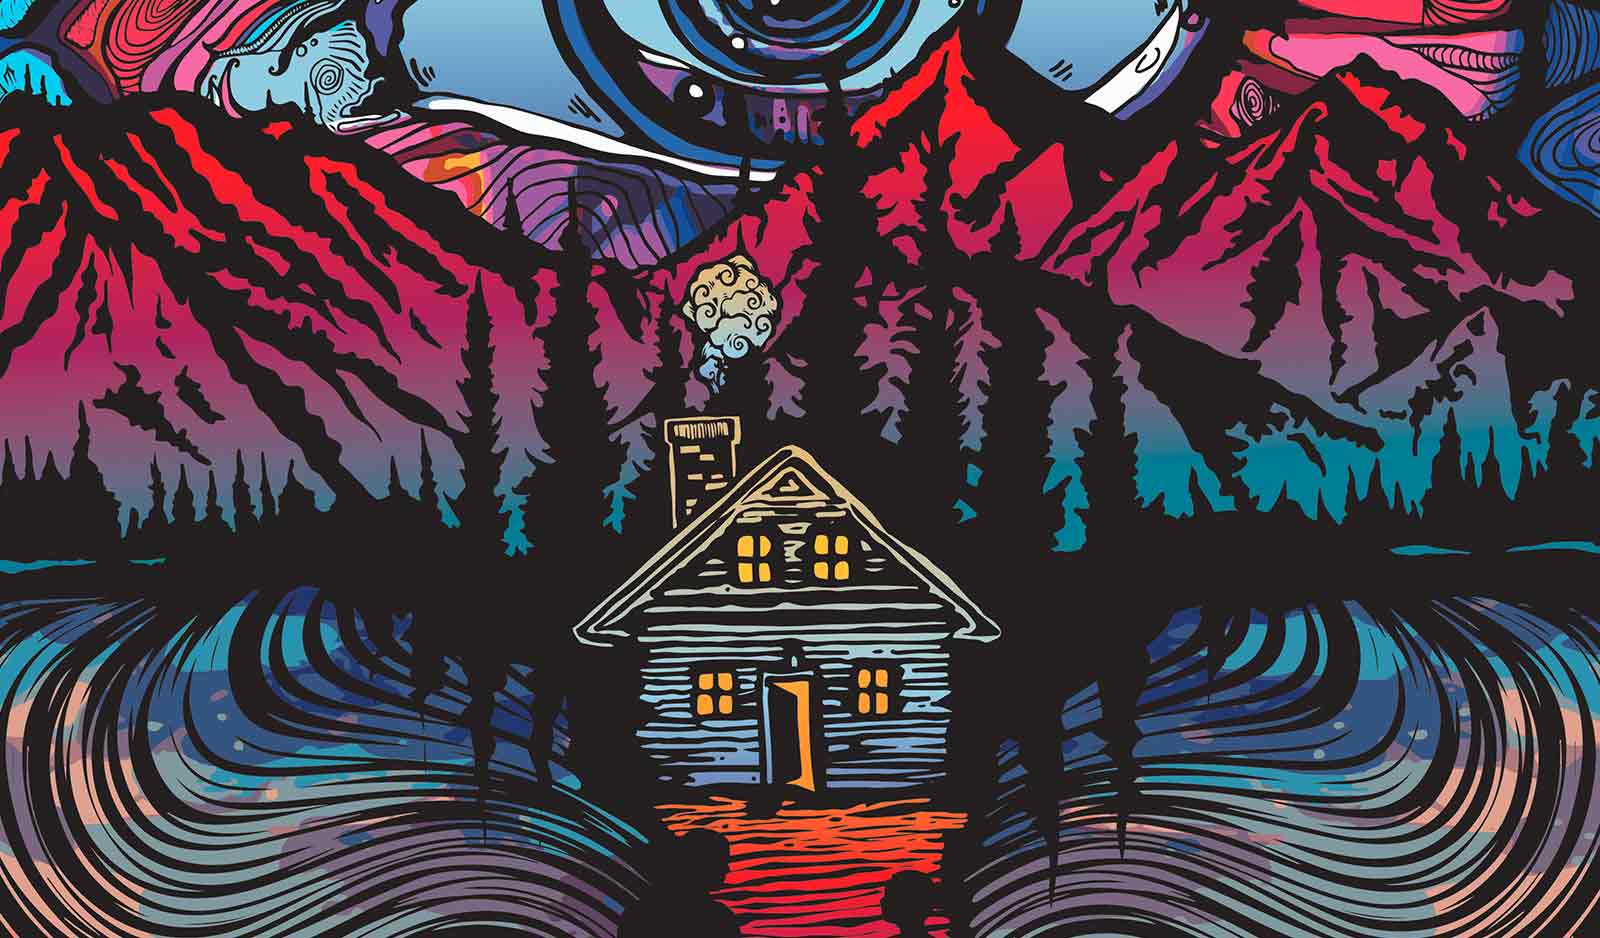 A section of the cabin fever poster design showing a cabin in the woods and the mountains behind it.